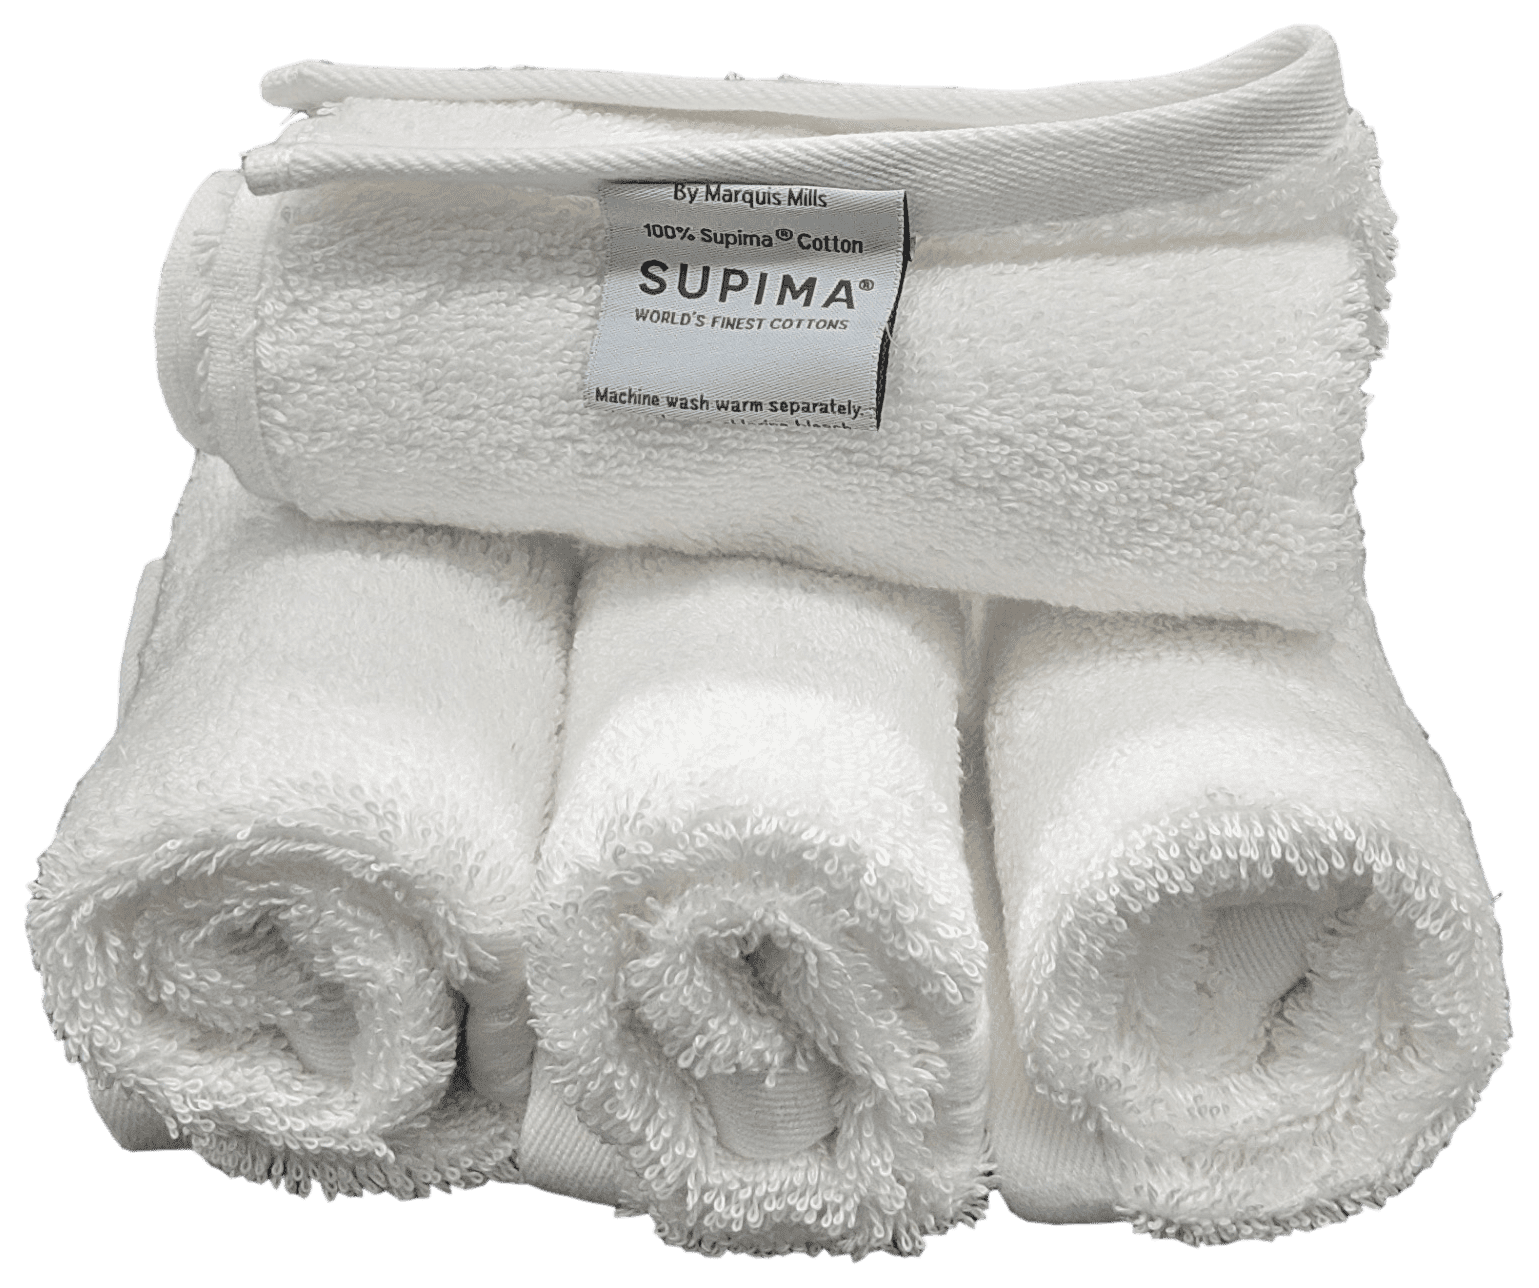 Utopia Towels Premium 700 GSM Cotton Washcloths - 12 Pack, White, 12 x 12 Inches Extra Soft Wash Cloths